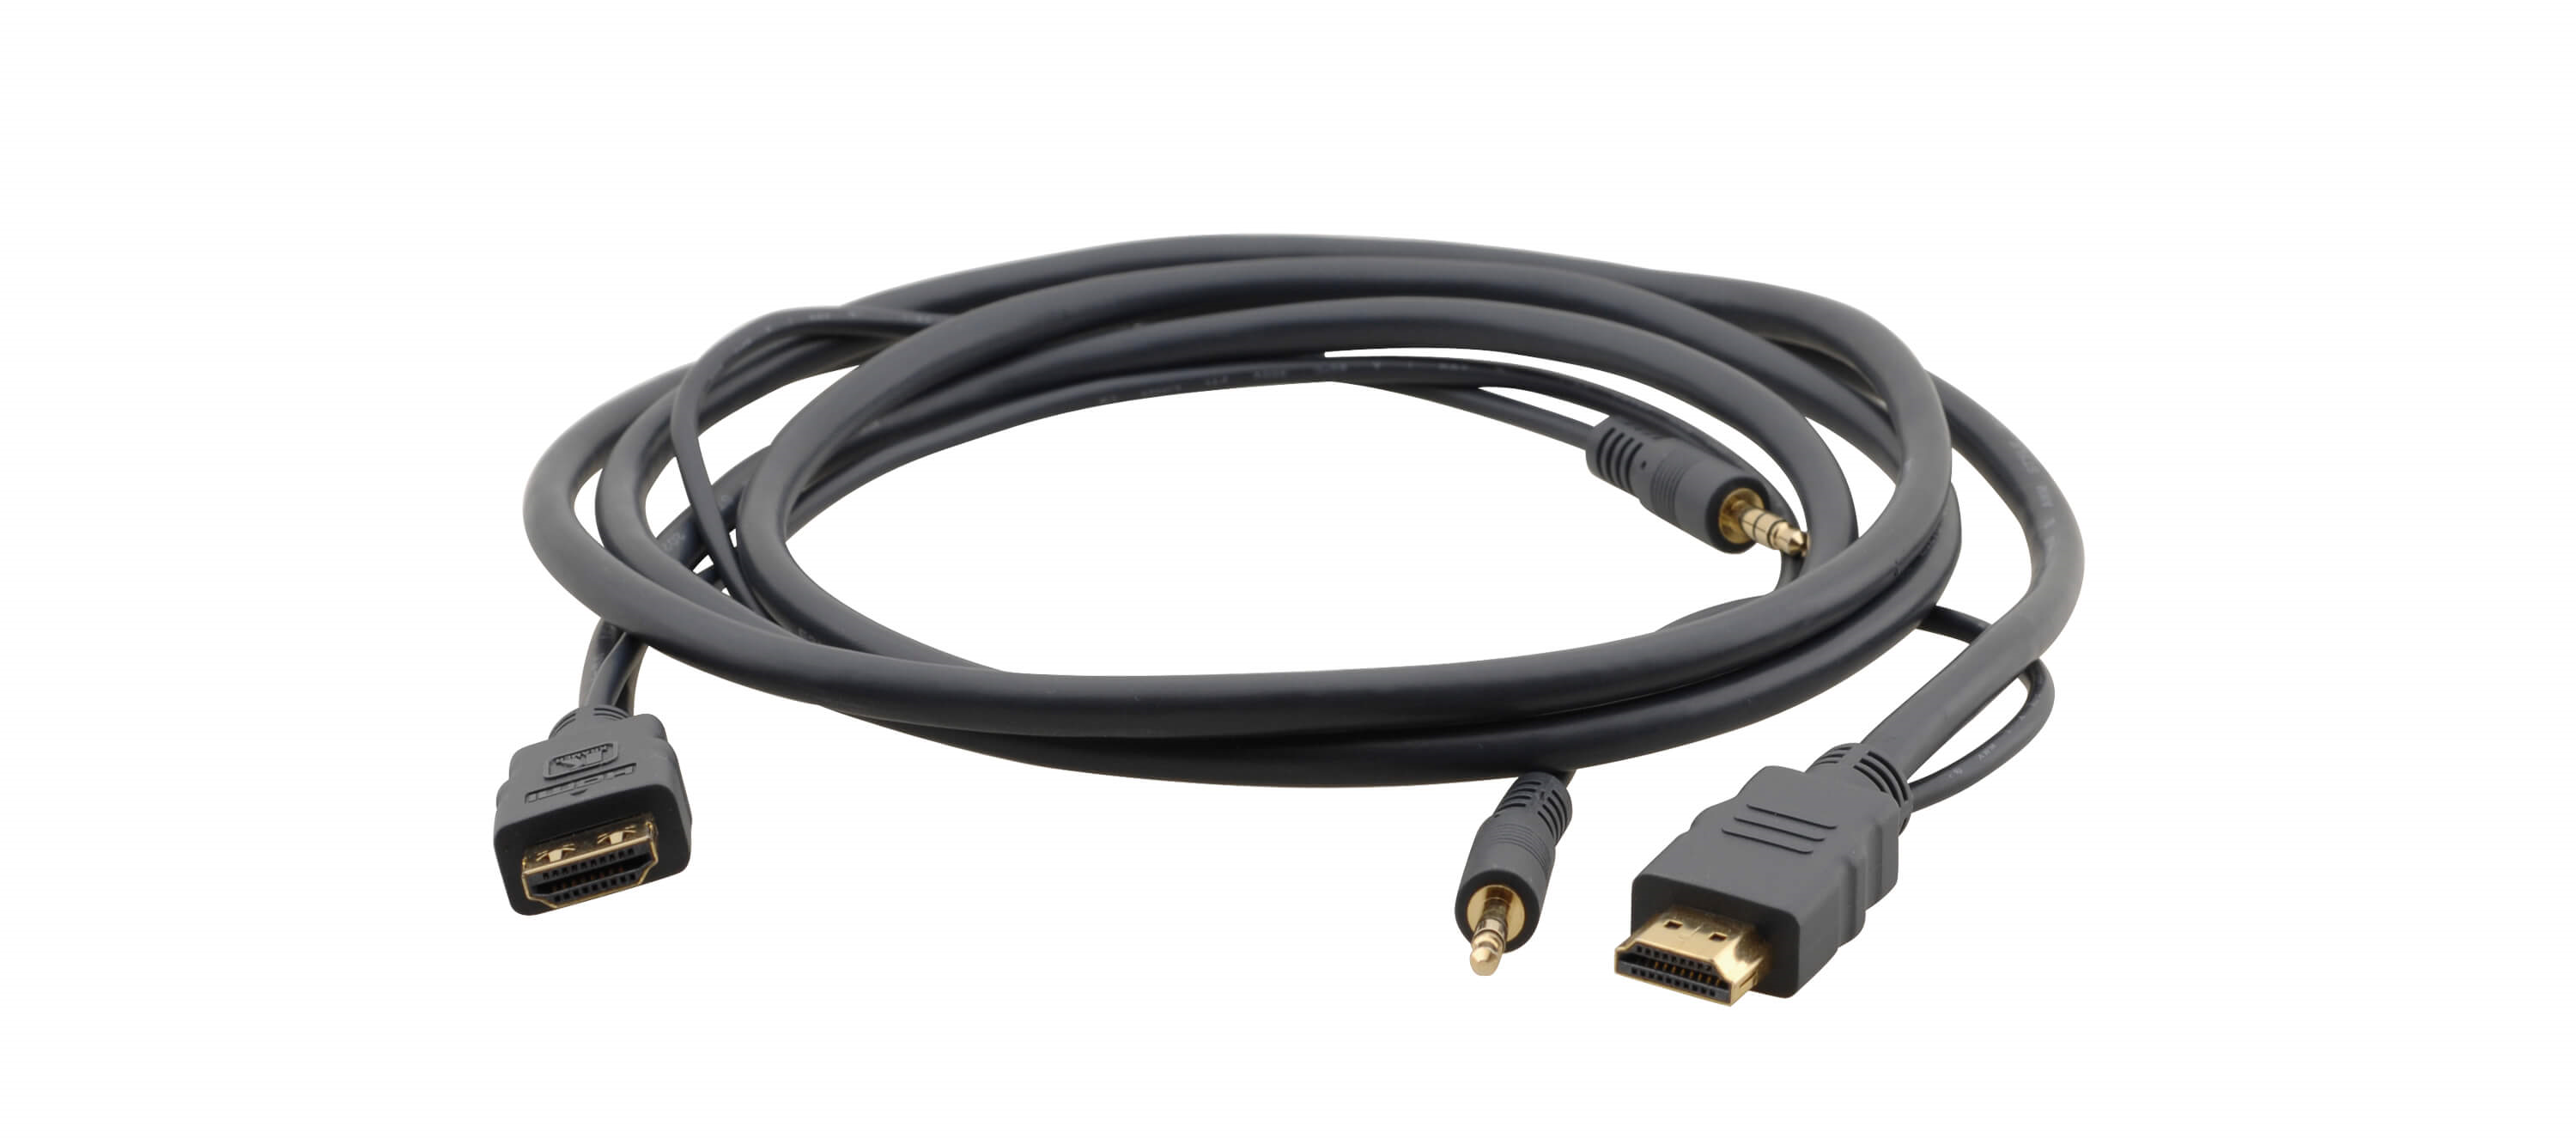 C-MHMA/MHMA-25 Flexible High–Speed HDMI Cable with Ethernet & 3.5mm Stereo Audio - 25'